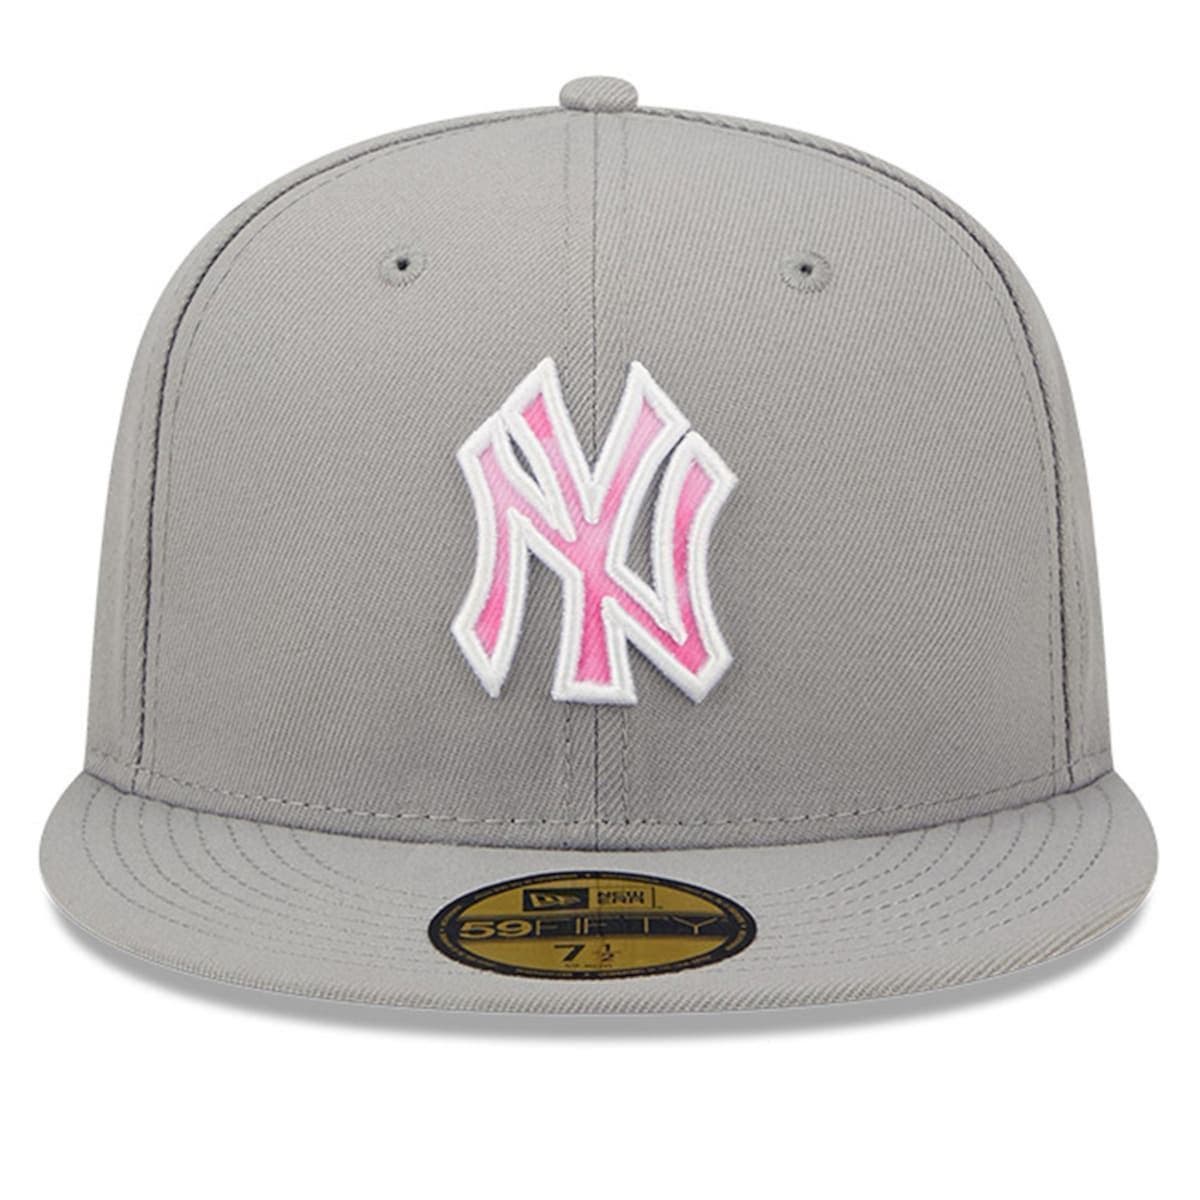 New Era 59Fifty Fitted Cap LIFESTYLE New York Yankees 